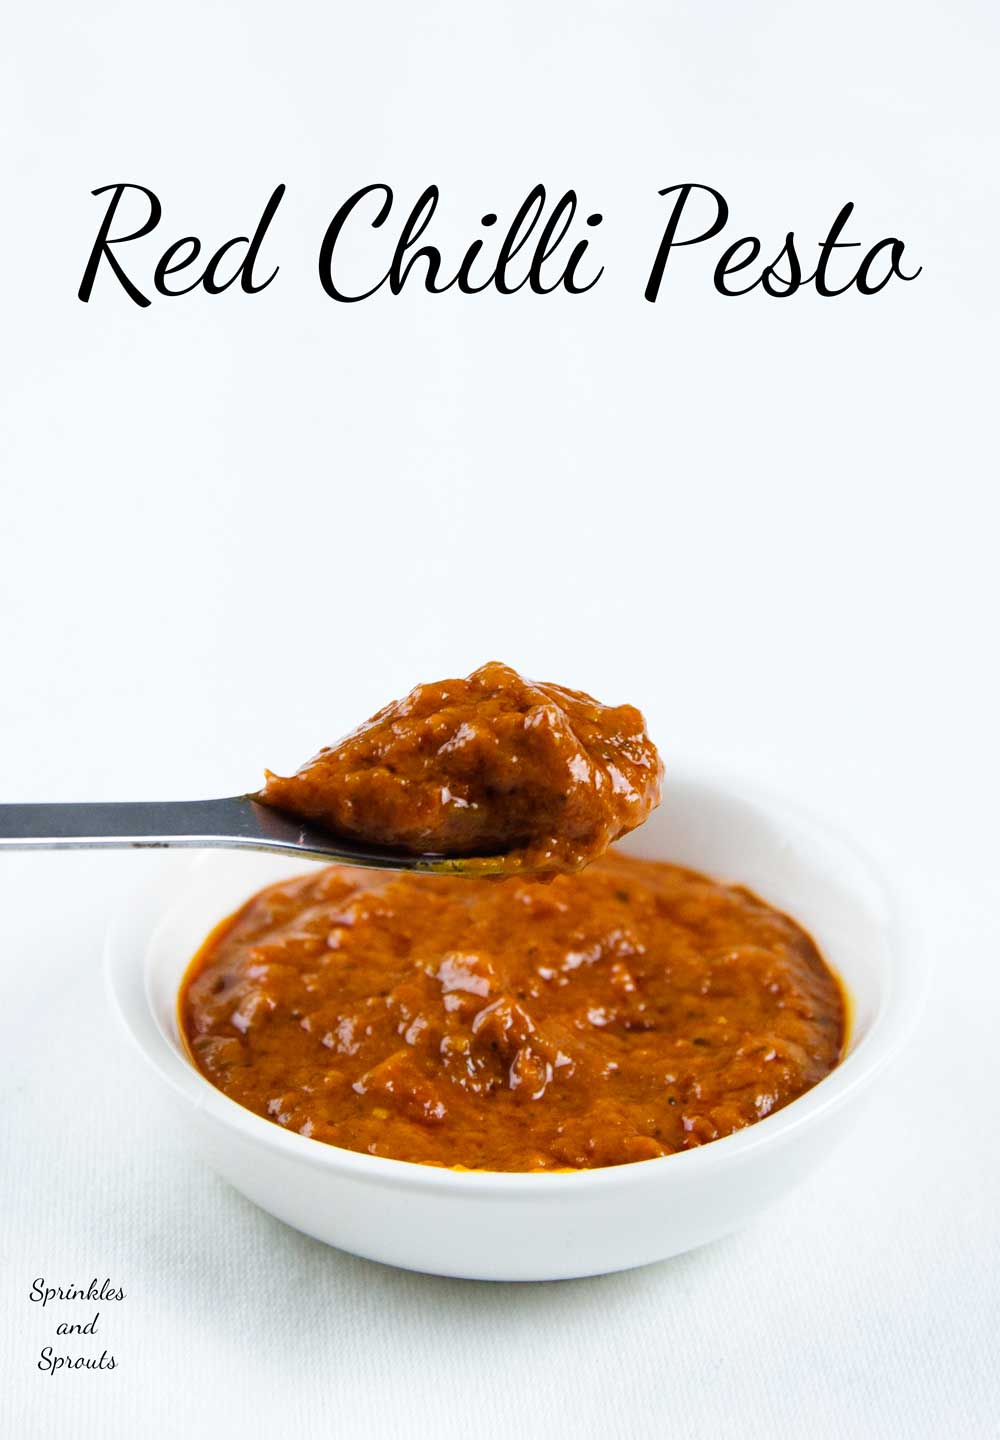 Red Chilli Pesto. A fiery sweet pesto that is perfect for pasta, dips, grilled meats and so so much more.